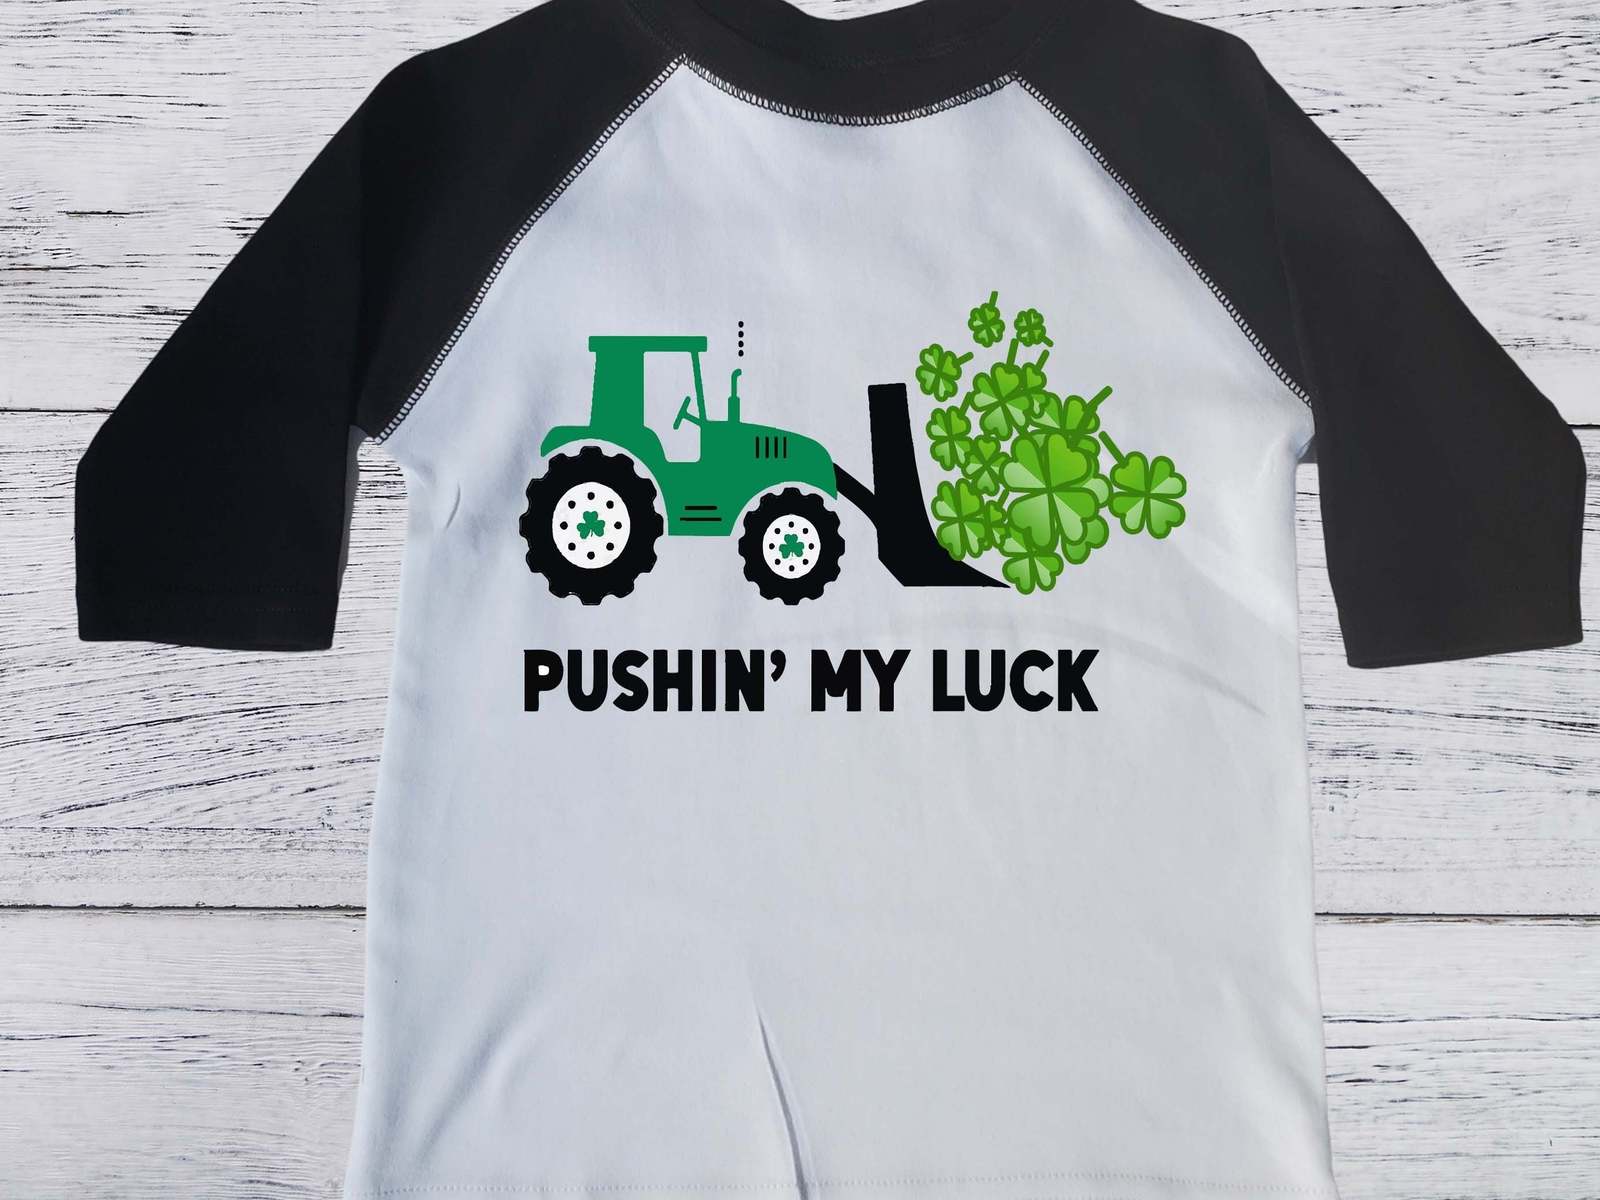 Primary image for St Patrick's day shirts | Pushing my Luck shirt | Irish shirt | St Patrick's day